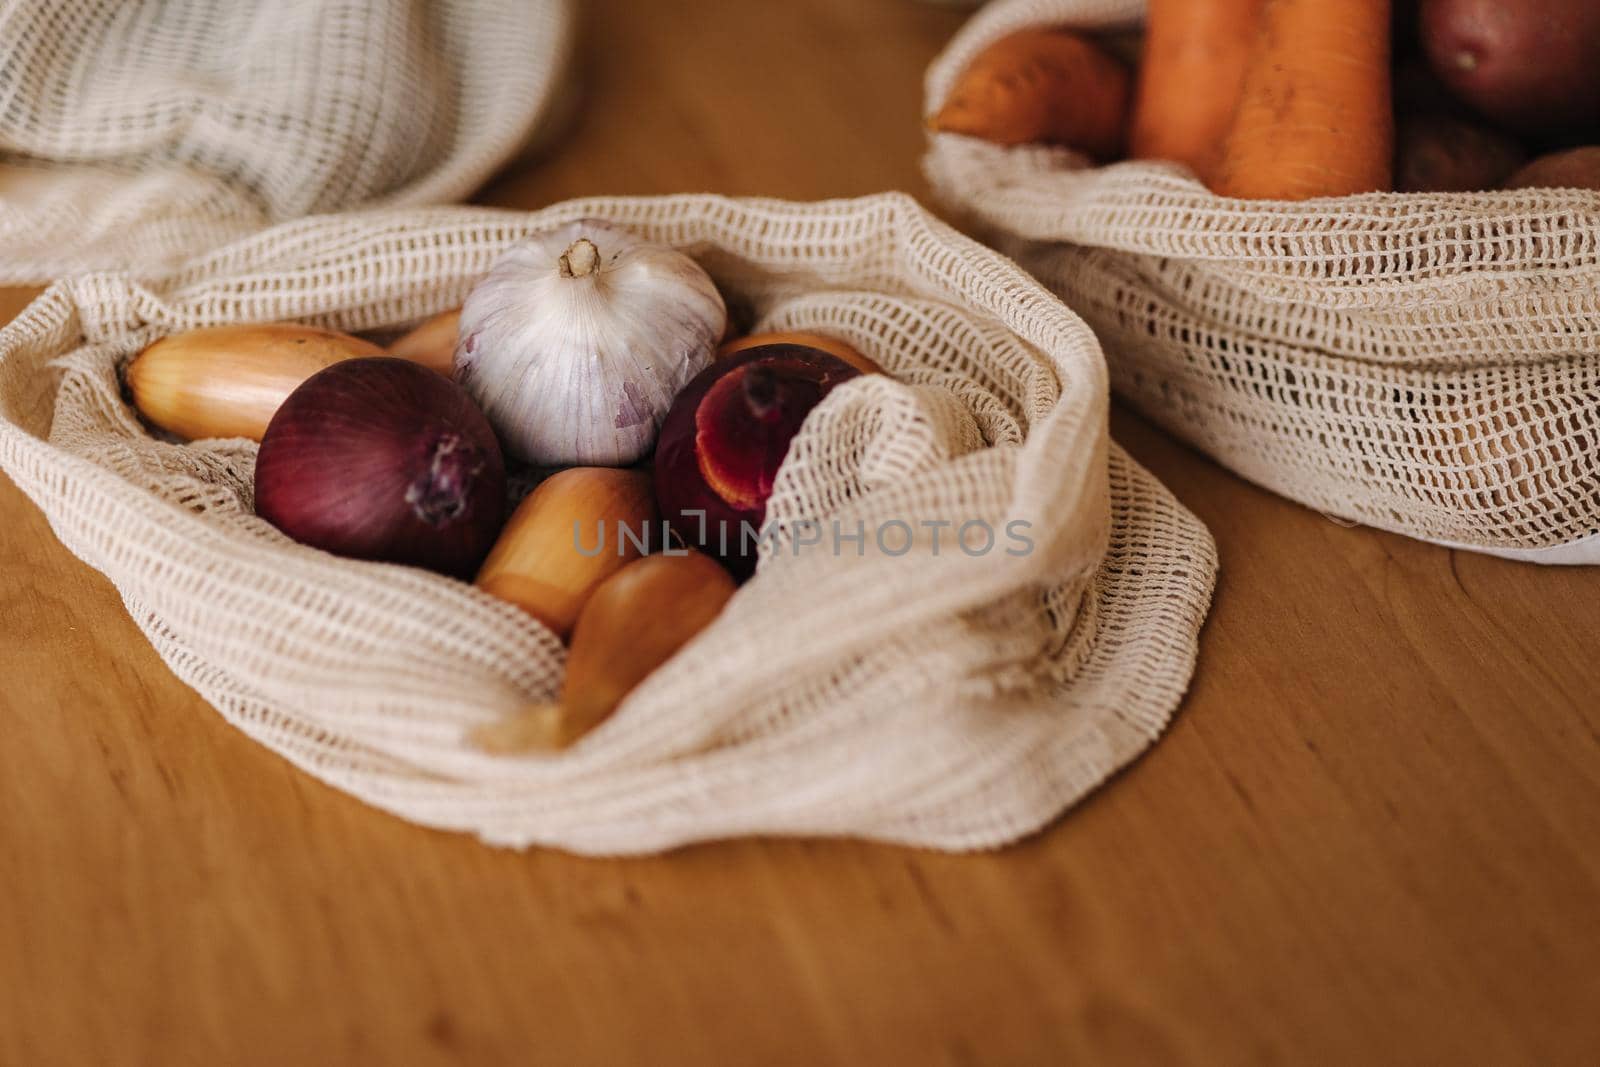 Garlic and onionin reusable grocery bag on a table at home. Mesh cotton with vegetables.